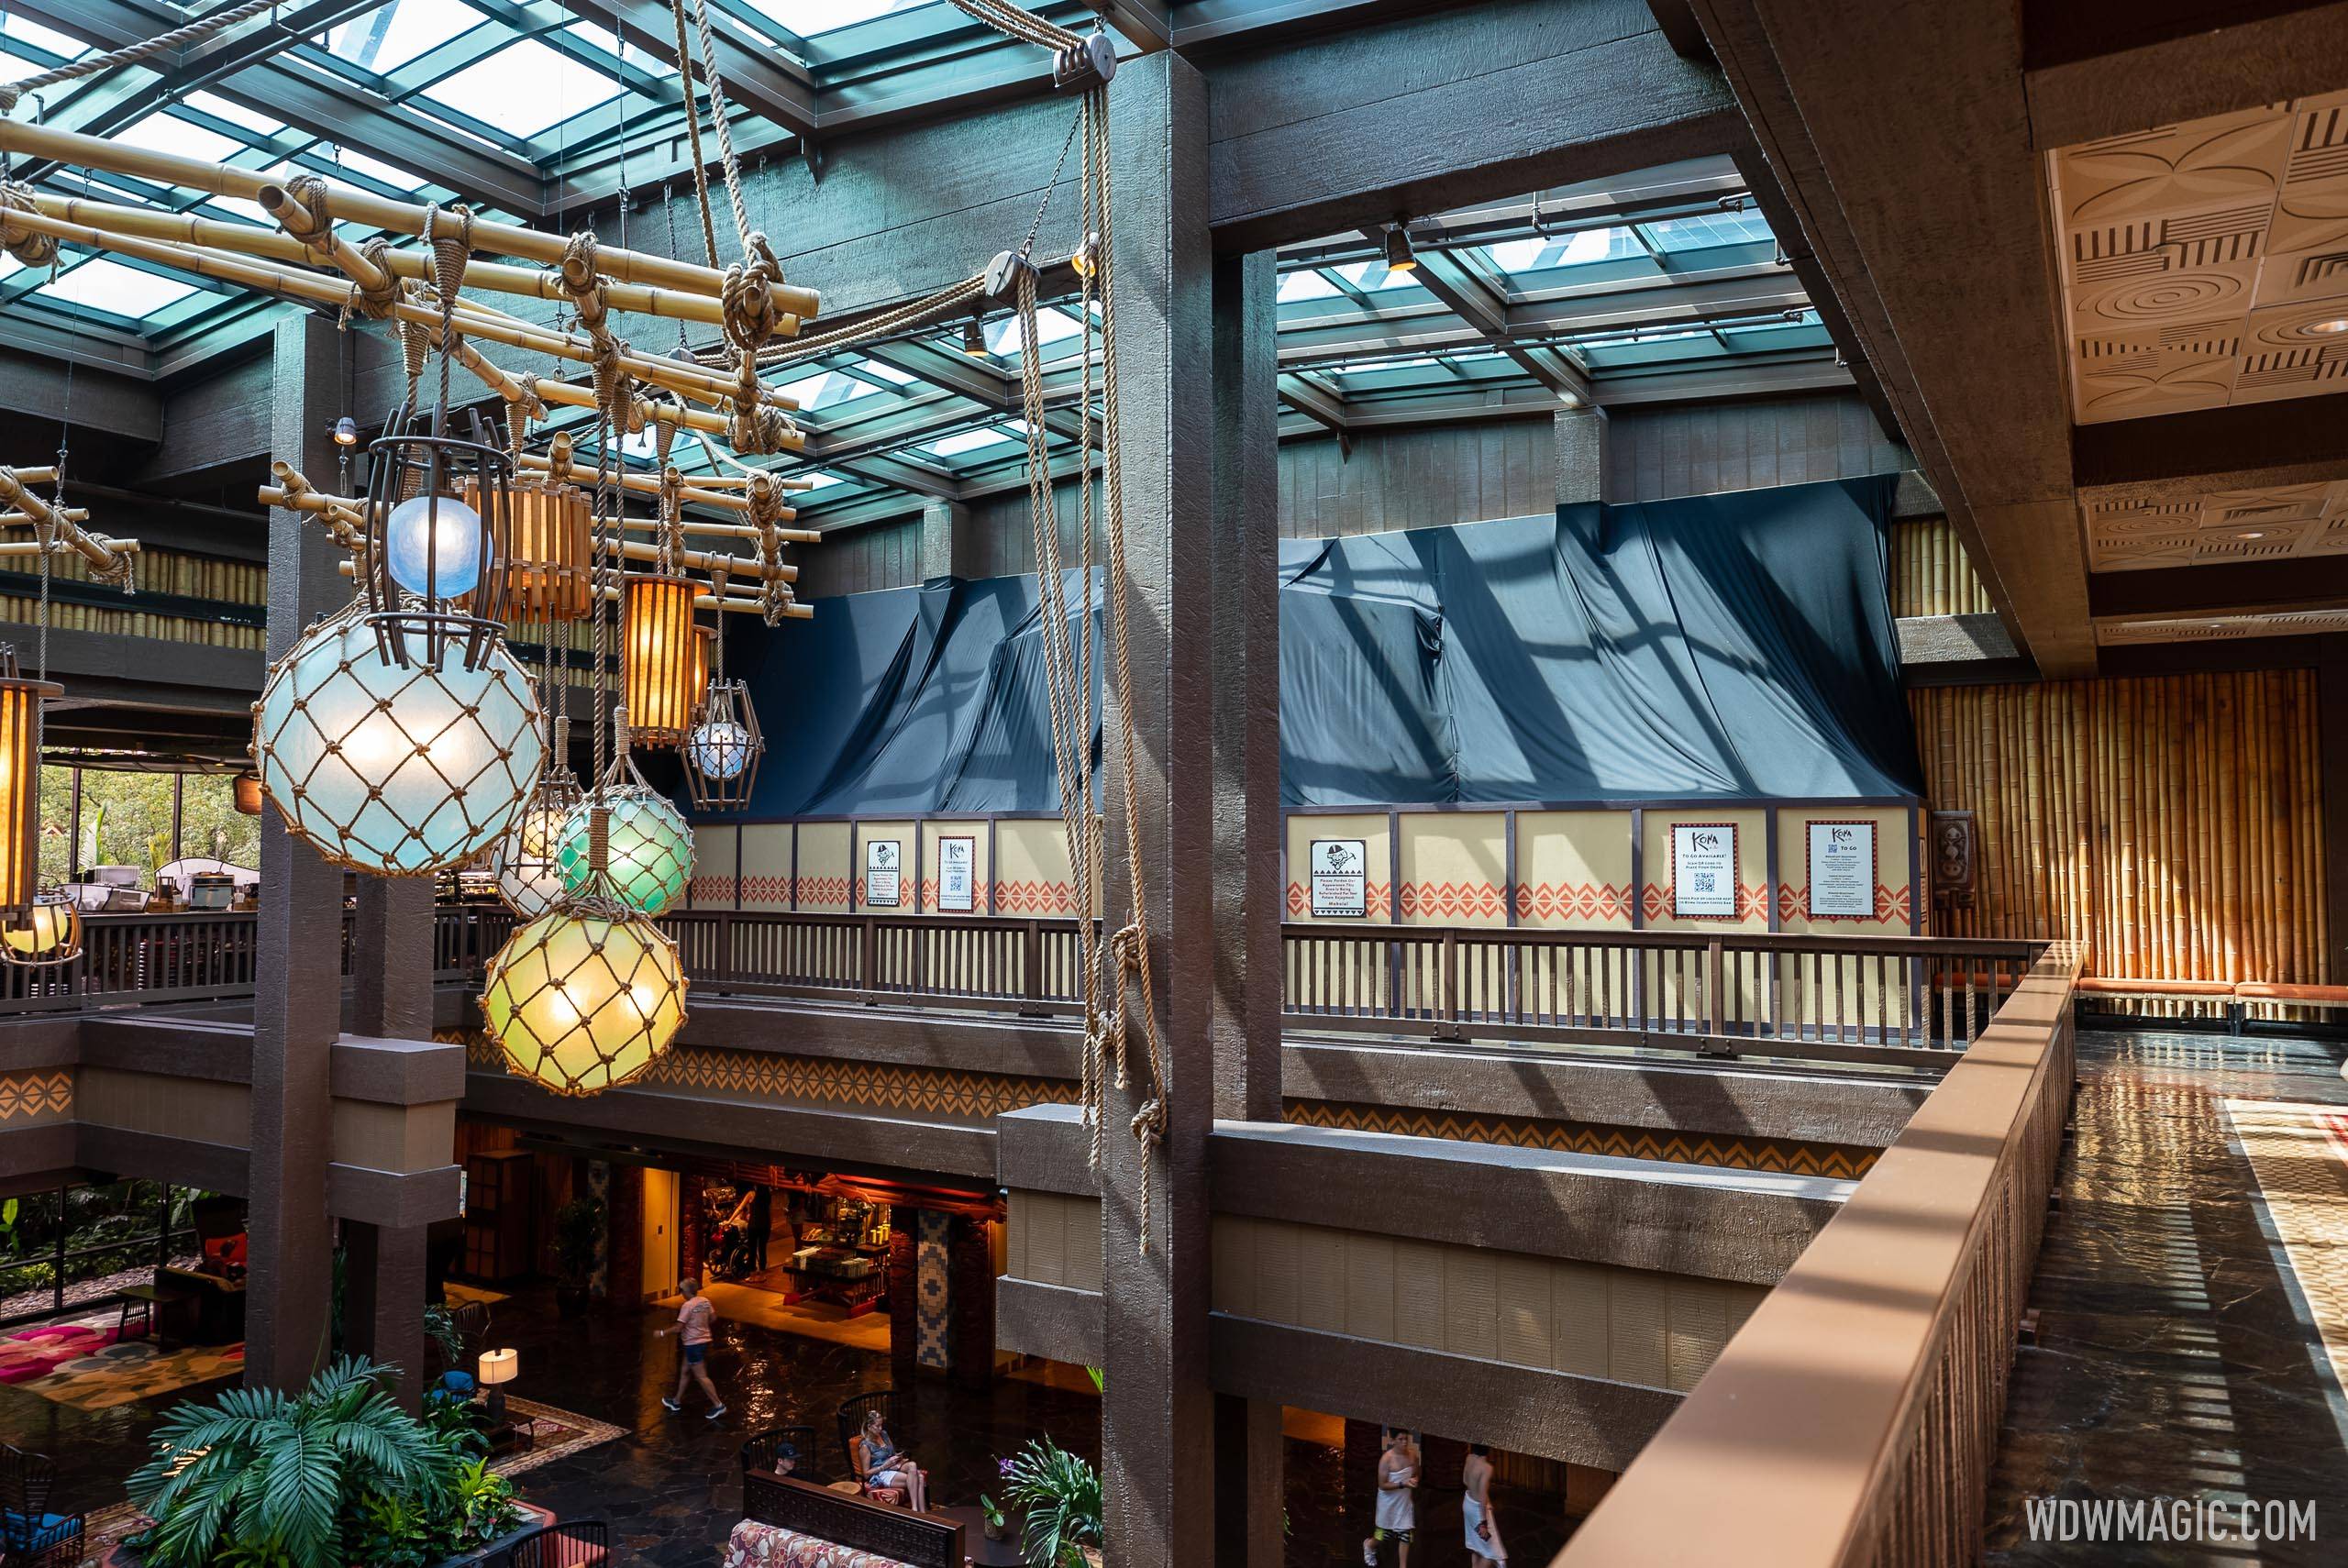 Tonga Toast and other fan favorites return to the new look Kona Cafe at Disney's Polynesian Village Resort